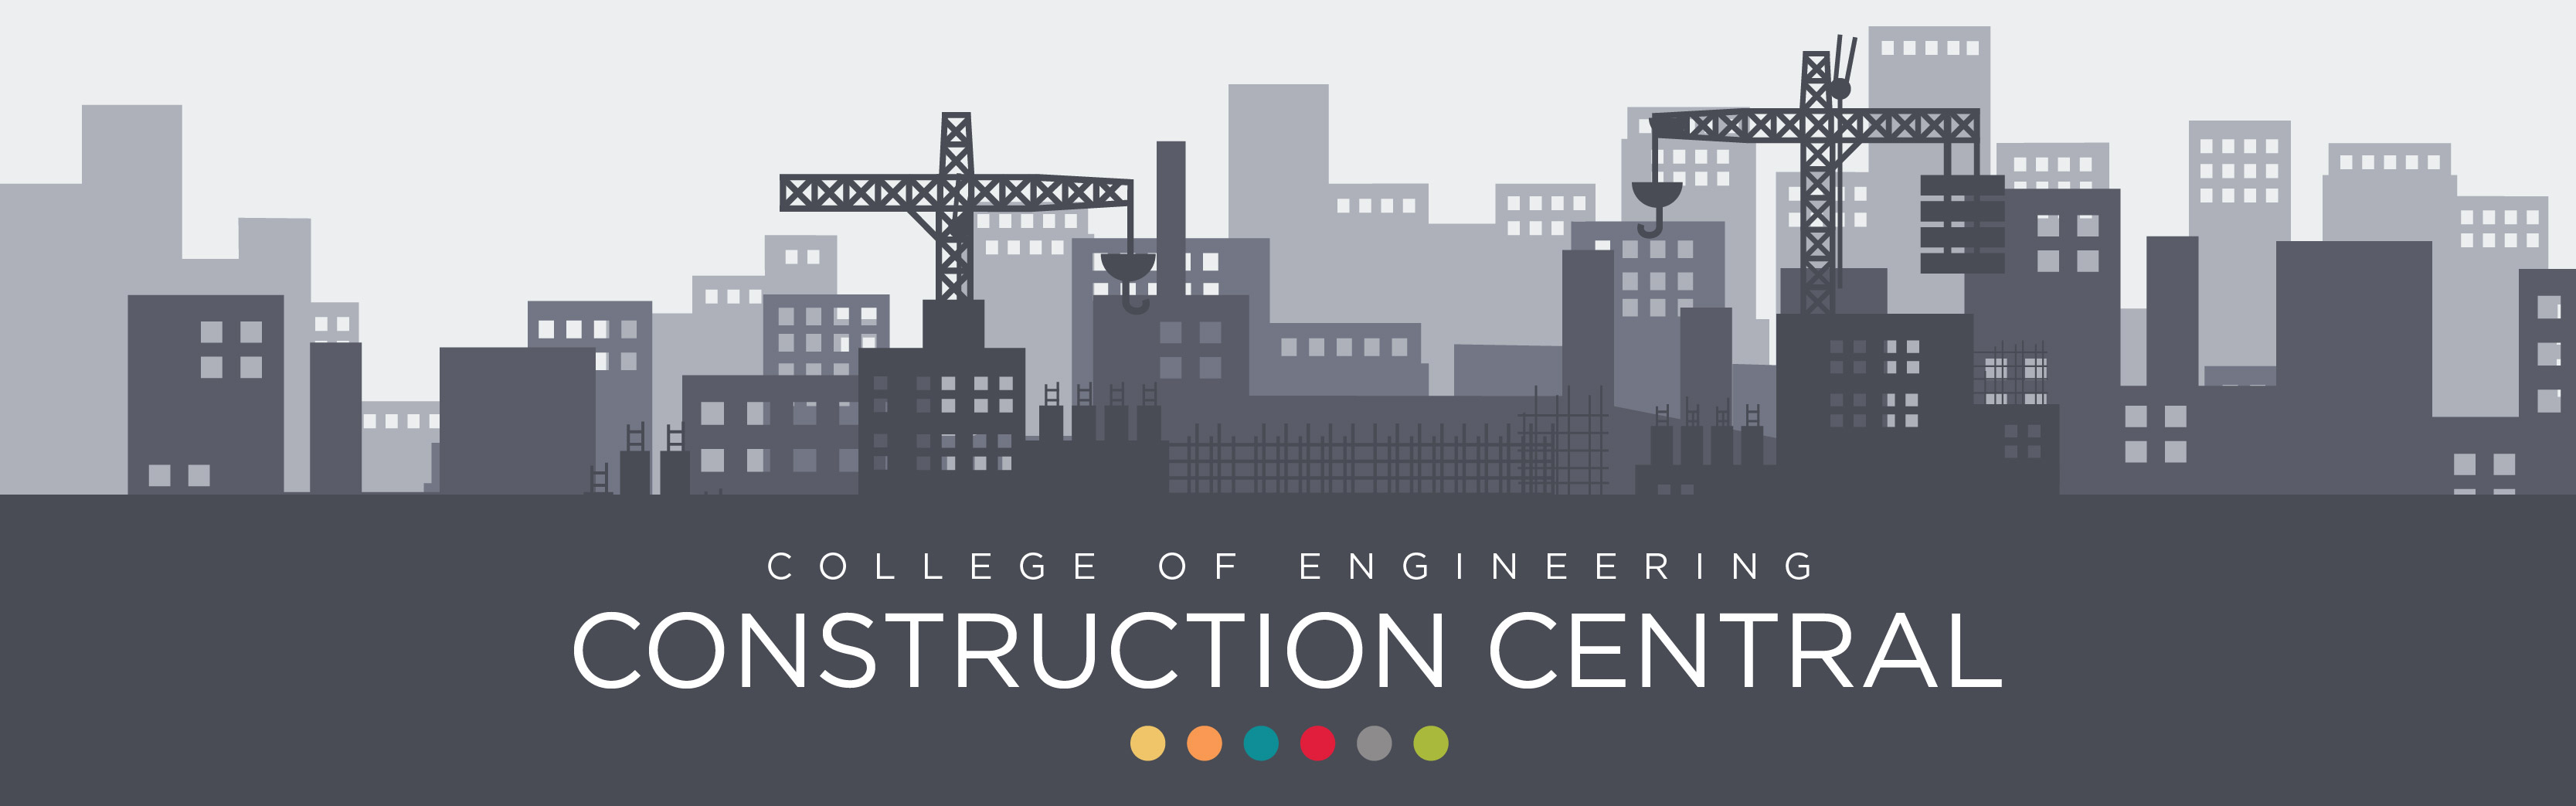 Design walkthroughs of SEC and the Link are scheduled for Jan. 15-16.